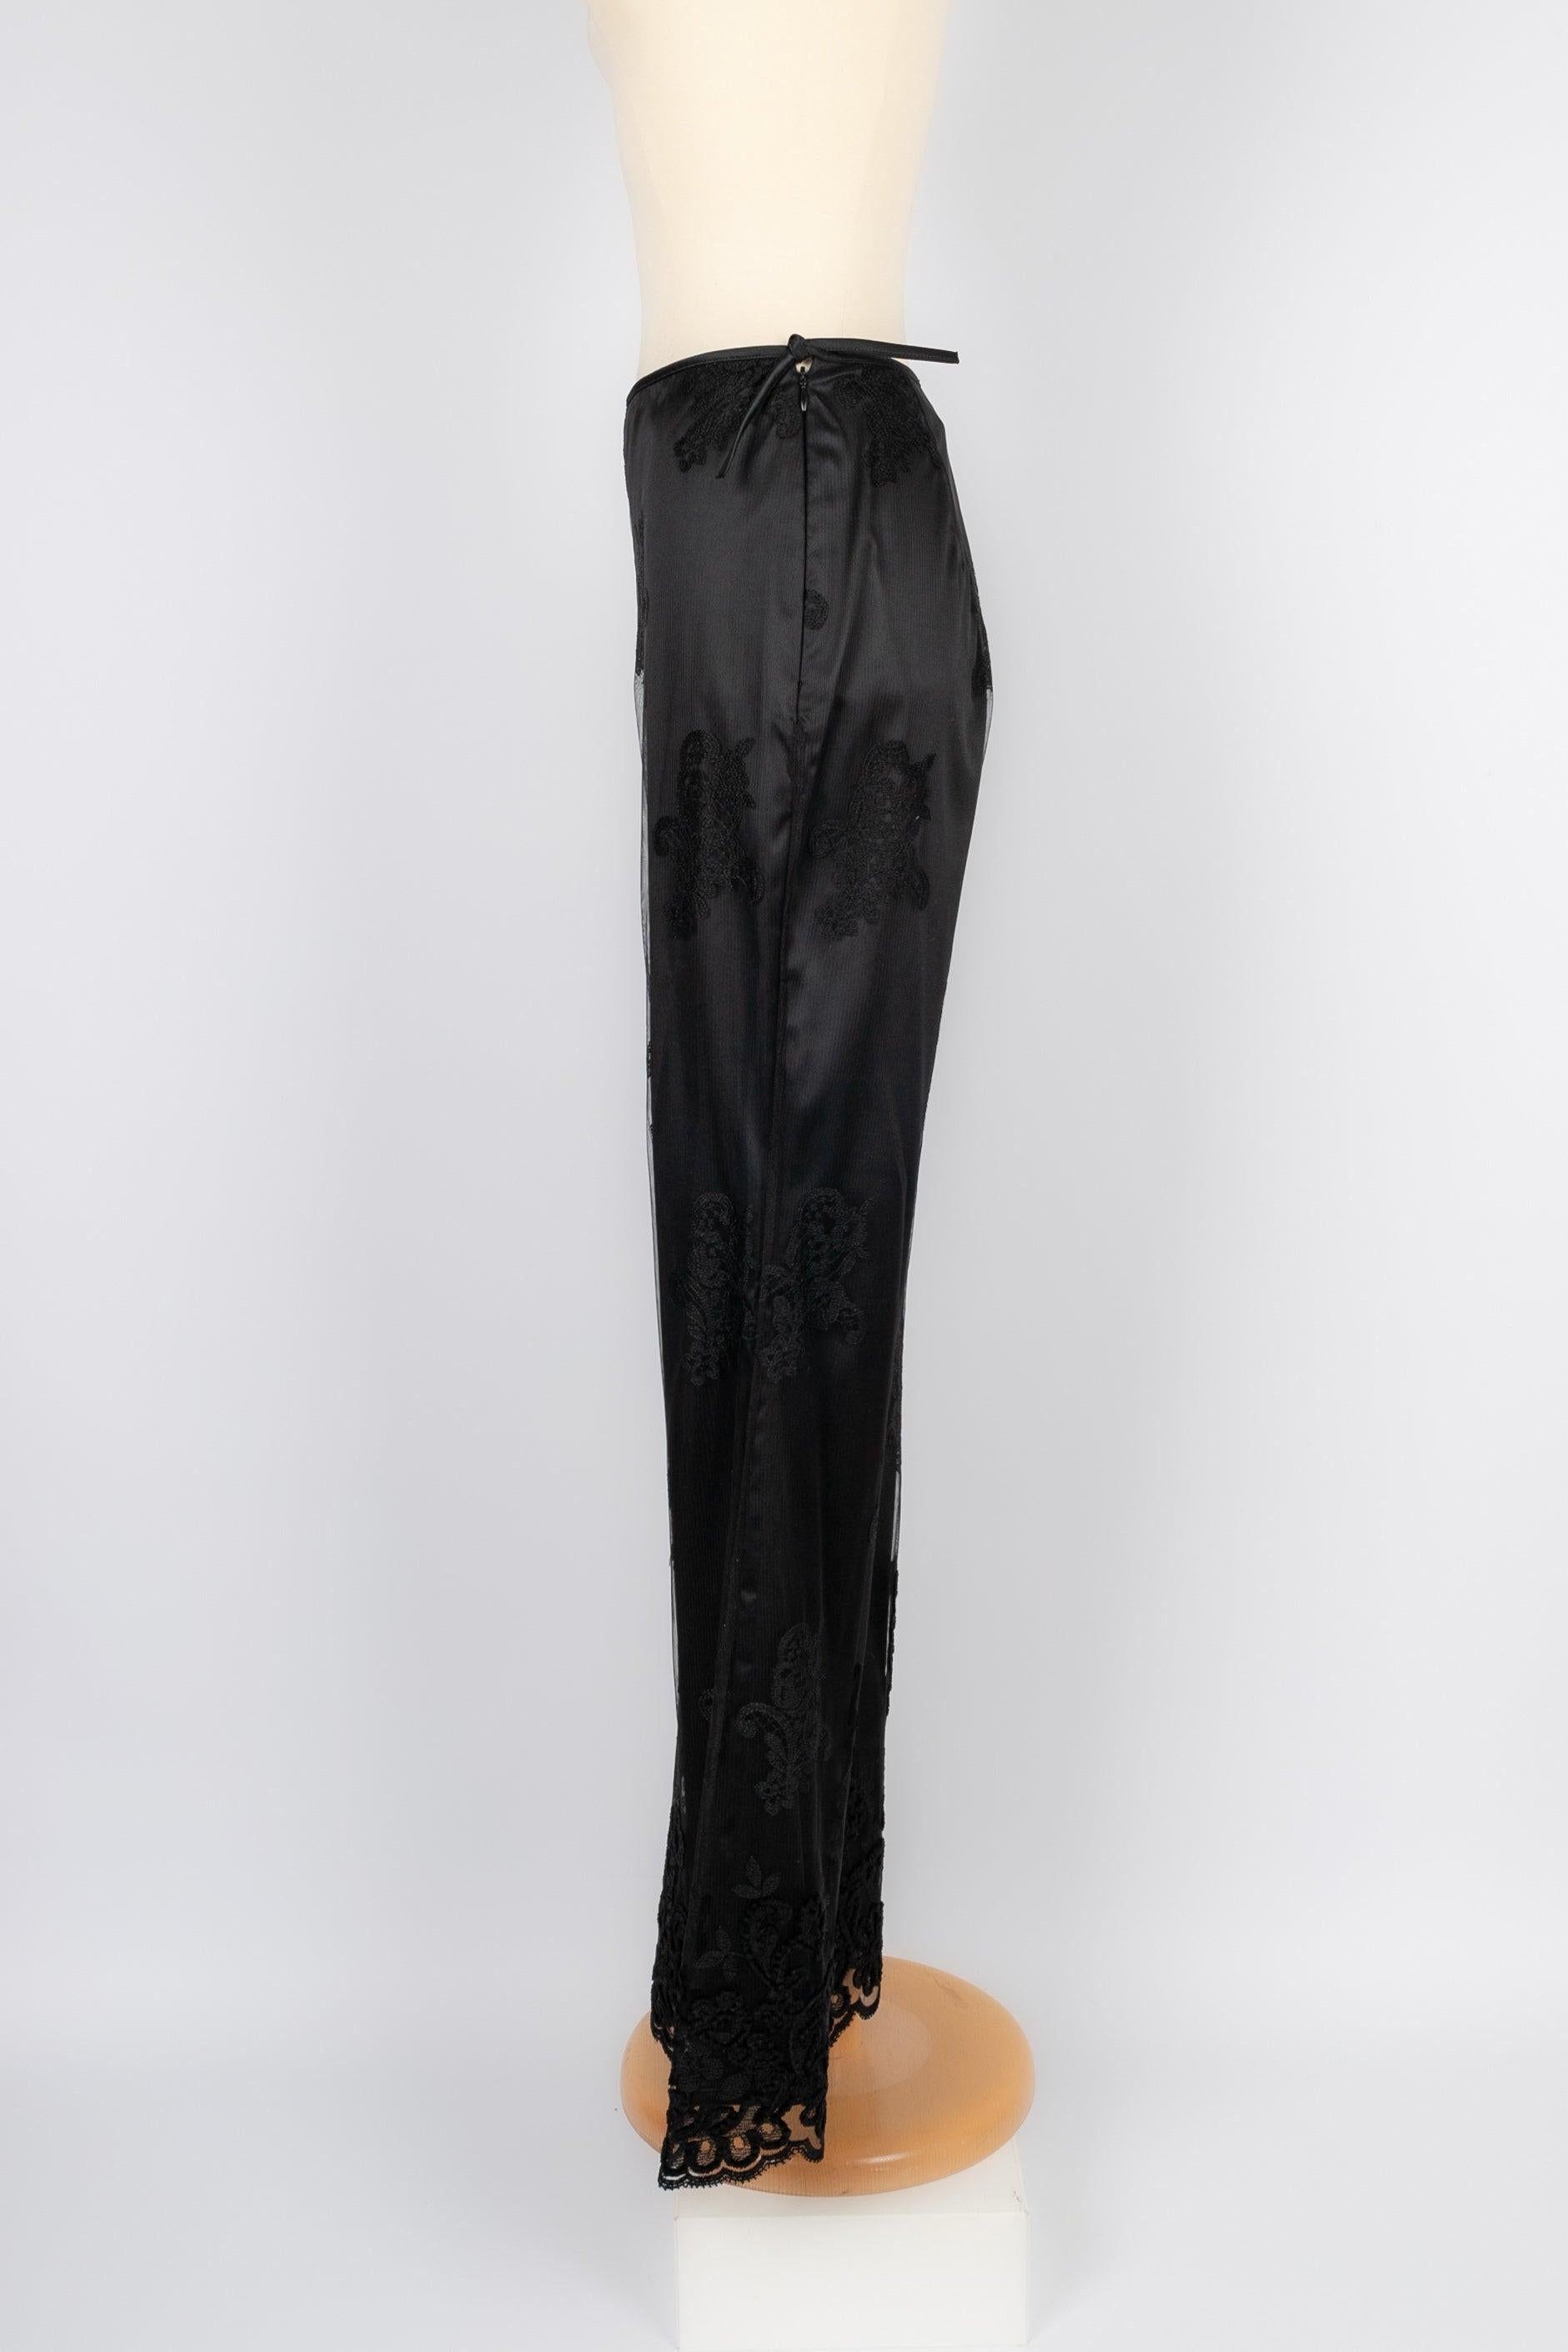 La Perla- (Made in Italy) Black satin pants enlivened with a tulle embroidered with patterns. 40IT size indicated, it fits a 36FR.

Additional information:
Condition: Very good condition
Dimensions: Waist: 33m - Hips: 40 cm - Length: 105 cm
Seller